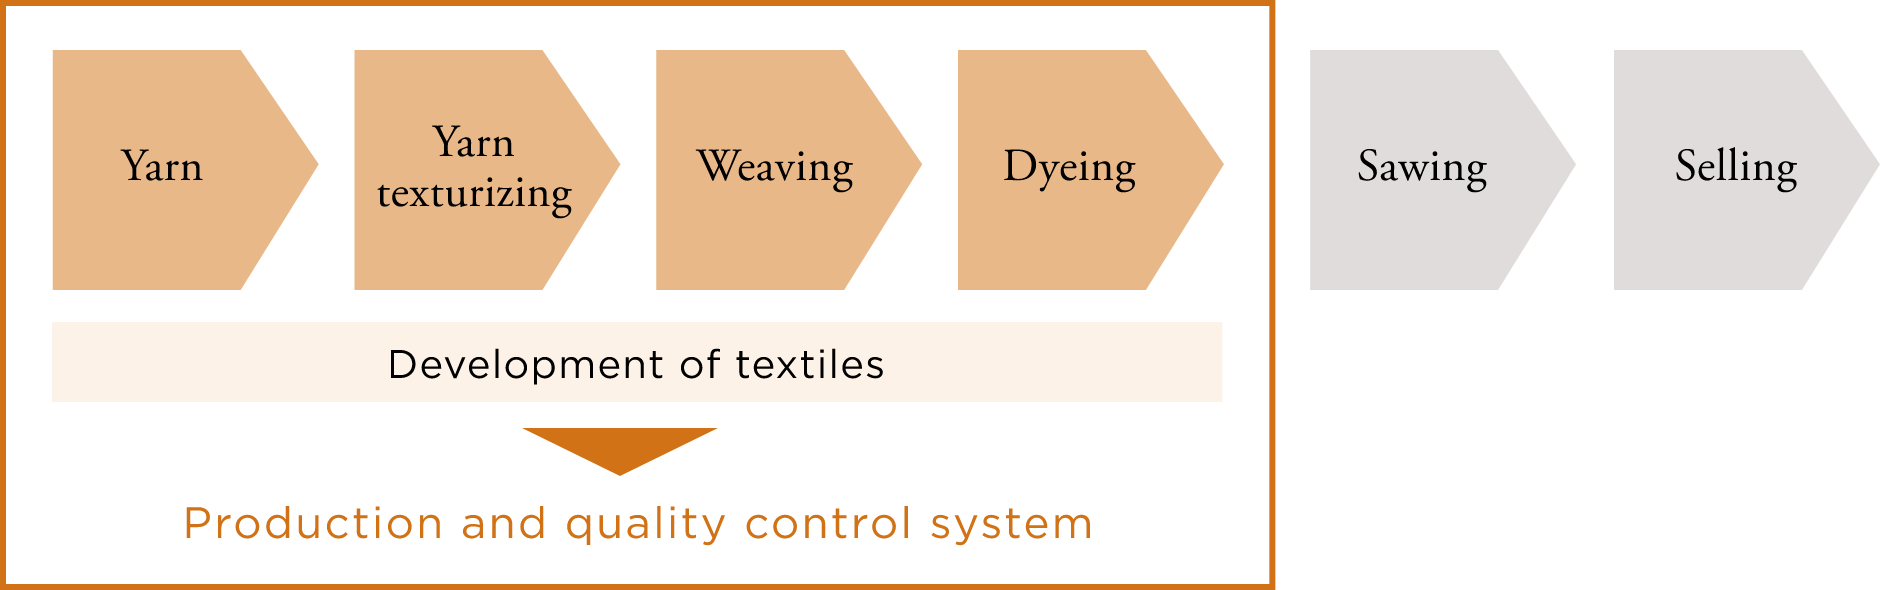 Yarn Yarn texturizing Weaving Dyeing Sawing Selling Development of textiles Production and quality control system Development of differentiated products and securing stable supply